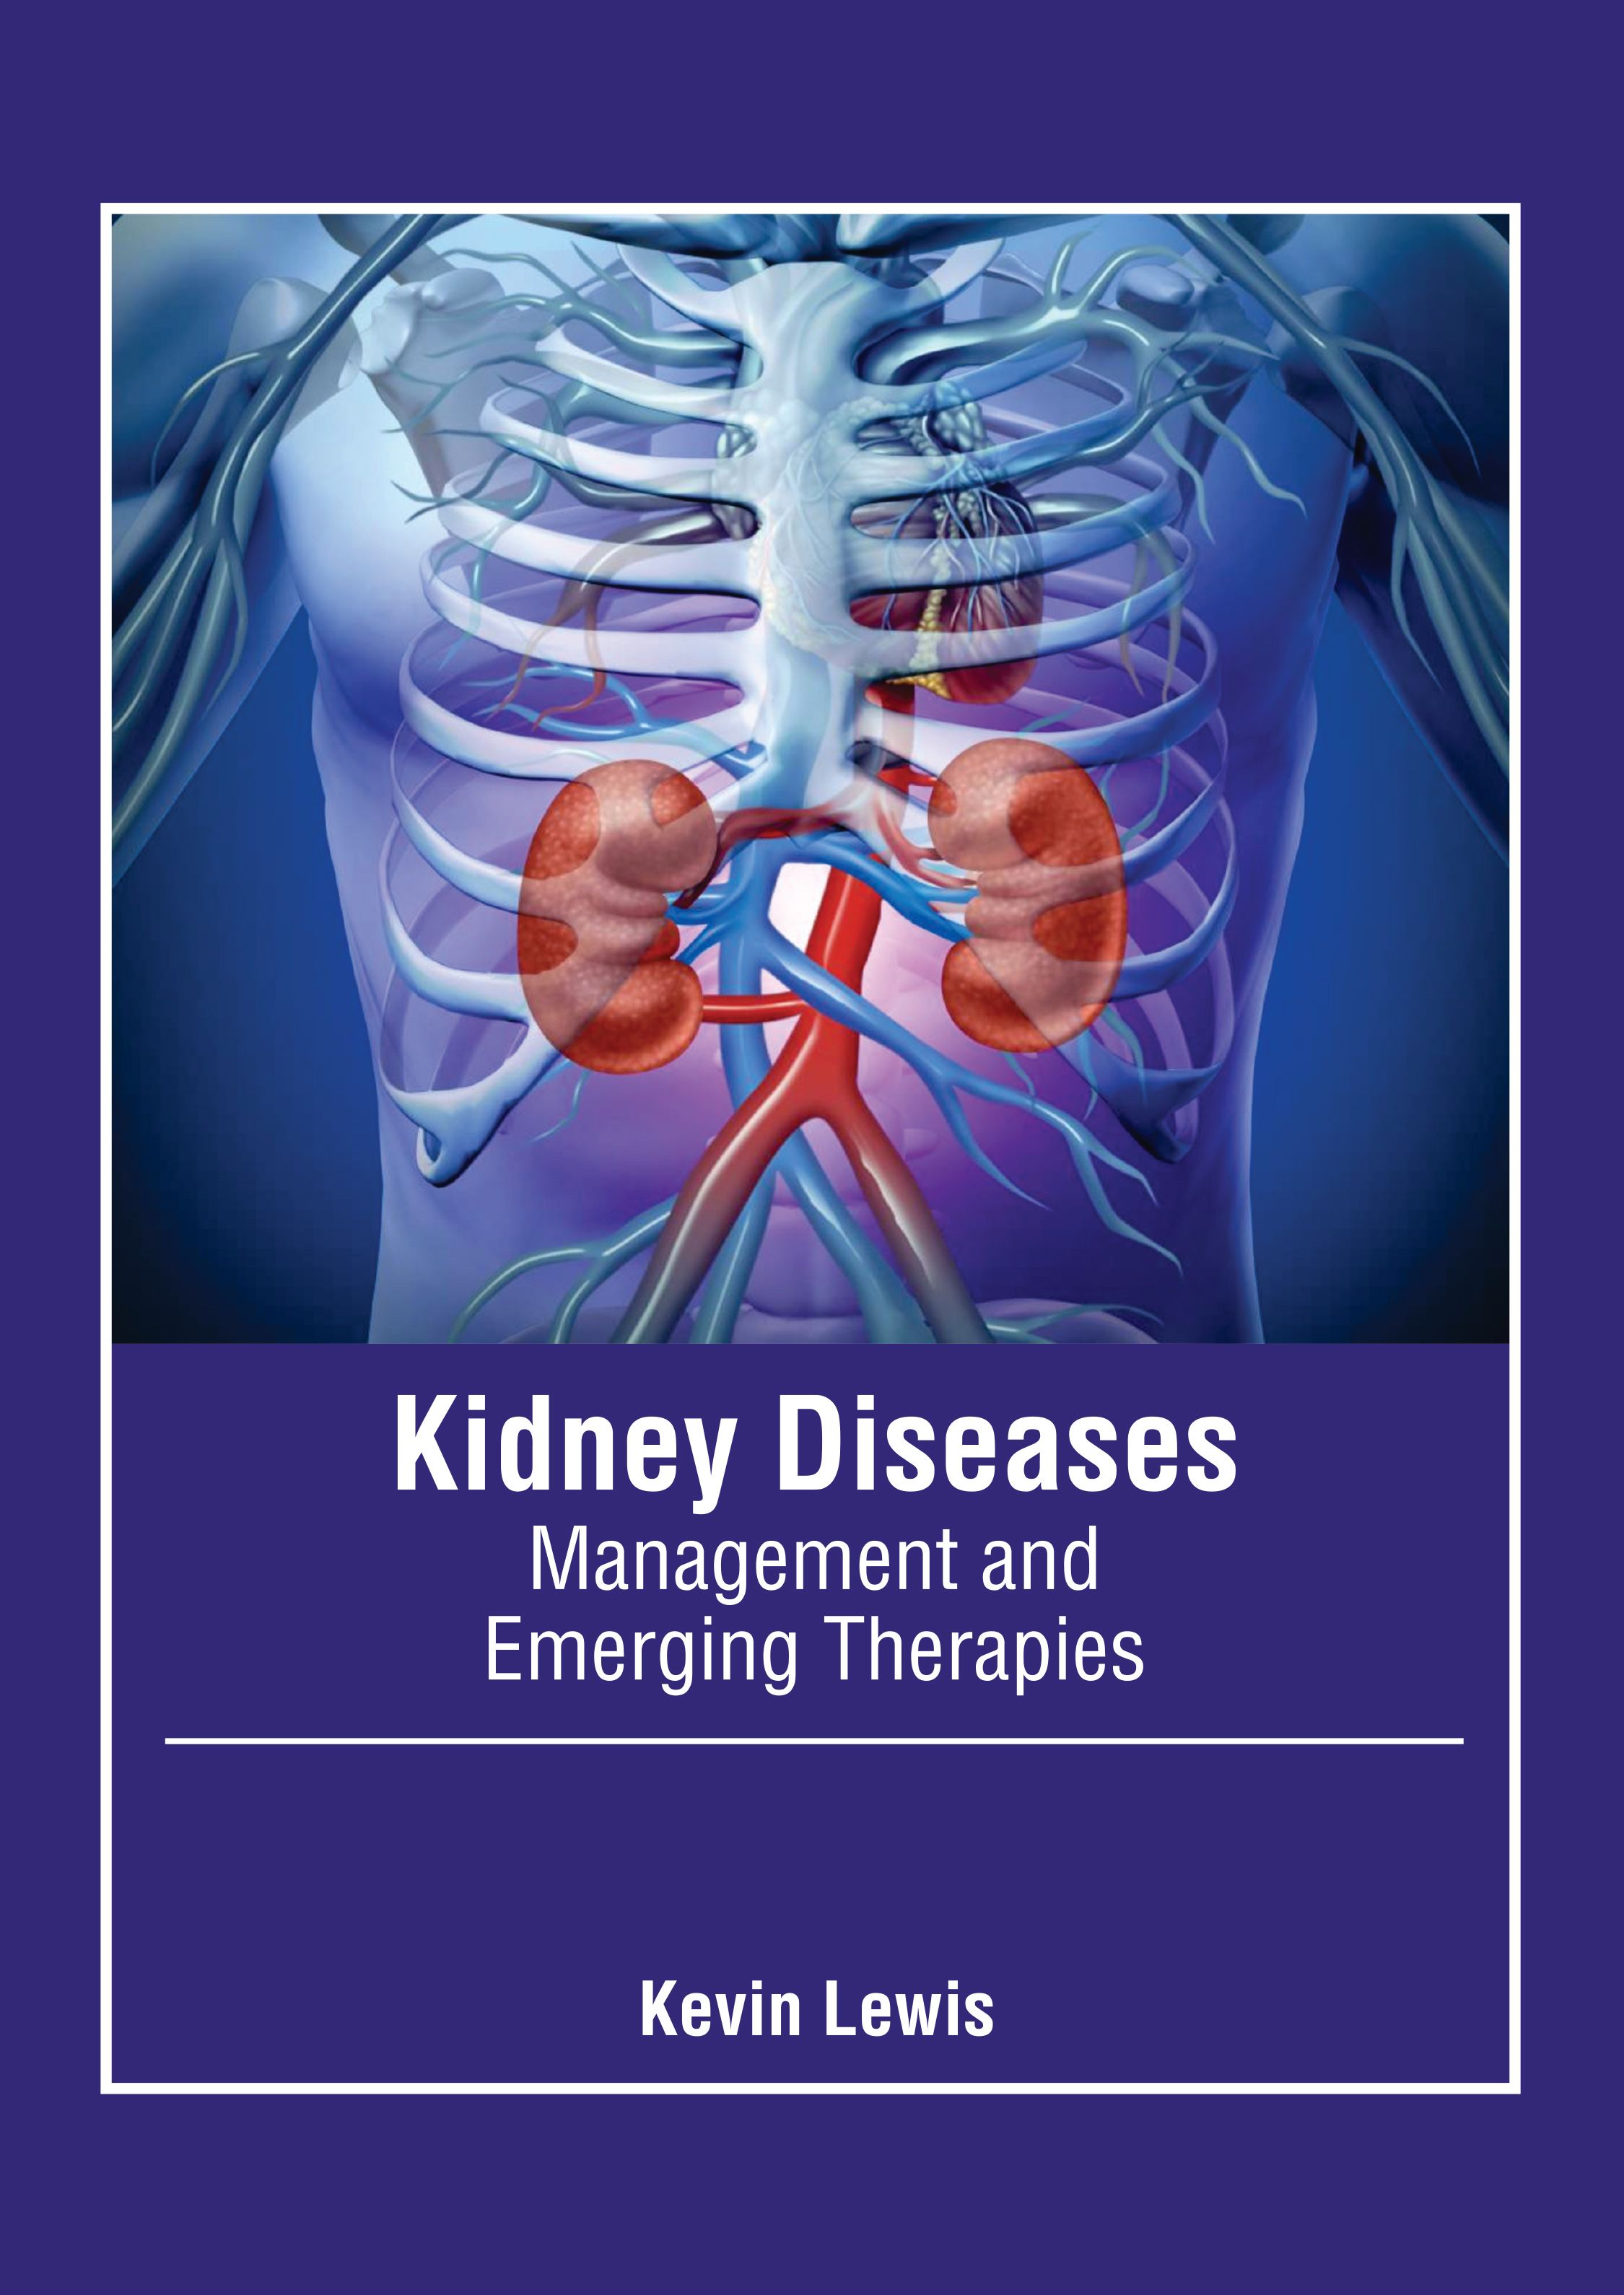 

exclusive-publishers/american-medical-publishers/kidney-diseases-management-and-emerging-therapies-9781639277100